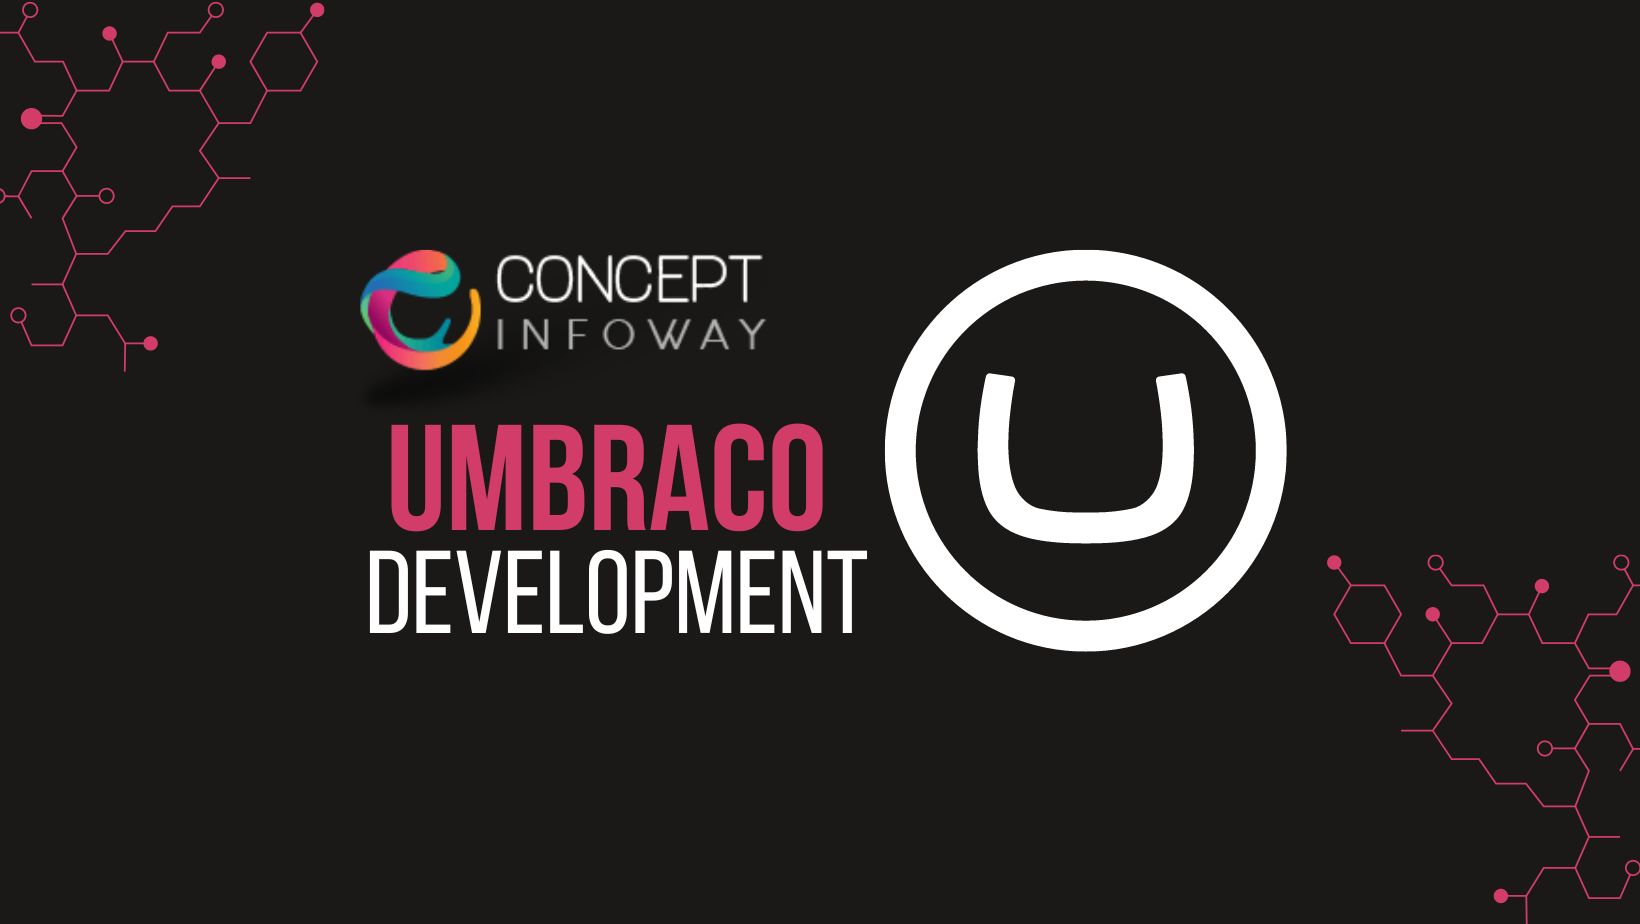 Umbraco Development: Empowering Digital Solutions with Concept Infoway